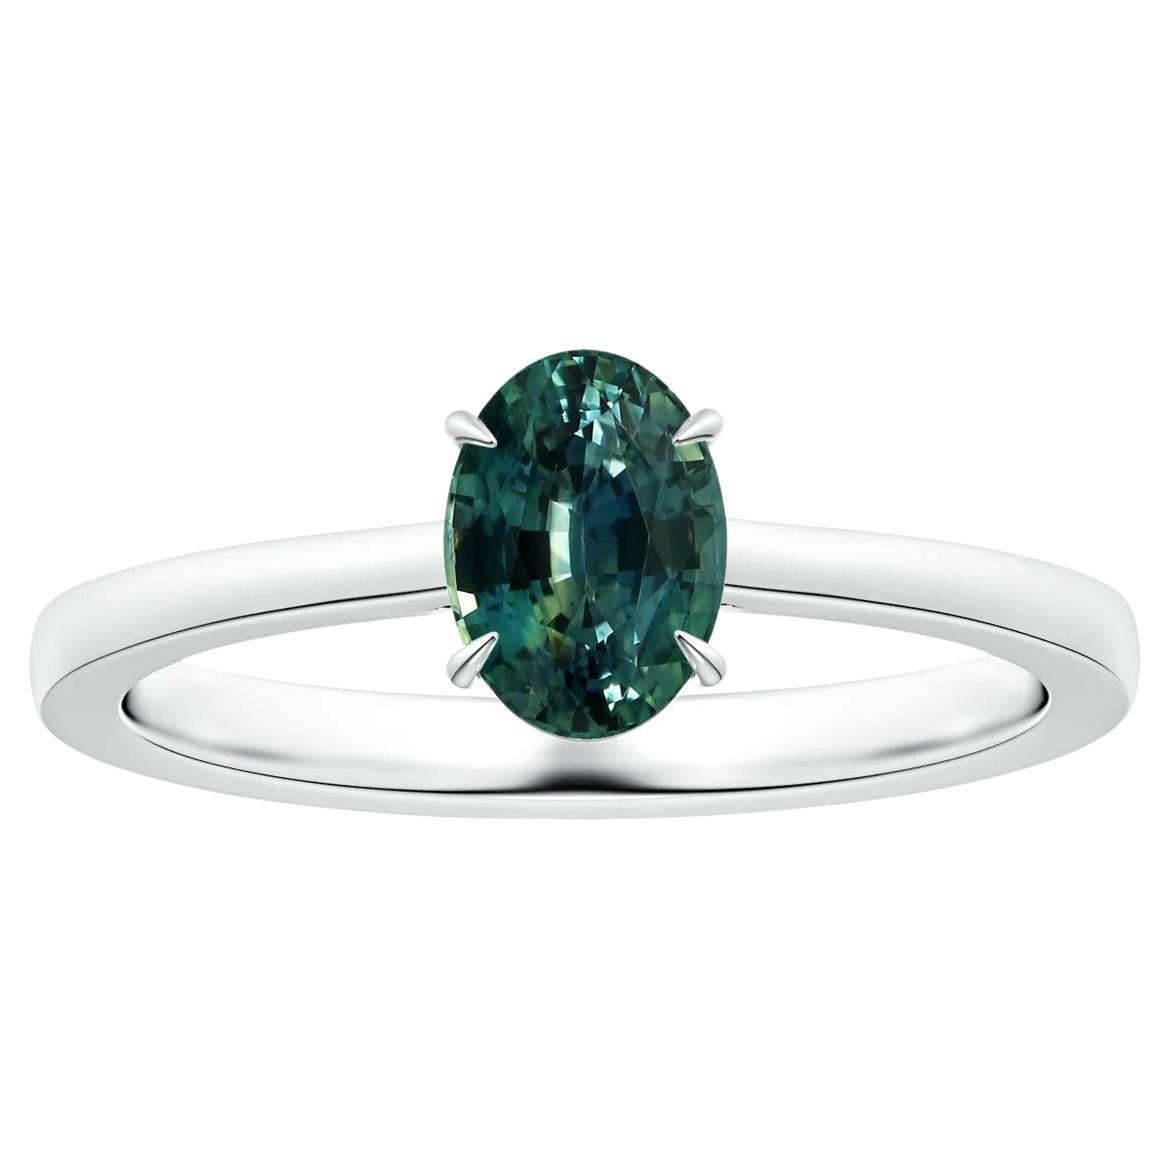 ANGARA GIA Certified Solitaire Teal Sapphire Ring in White Gold